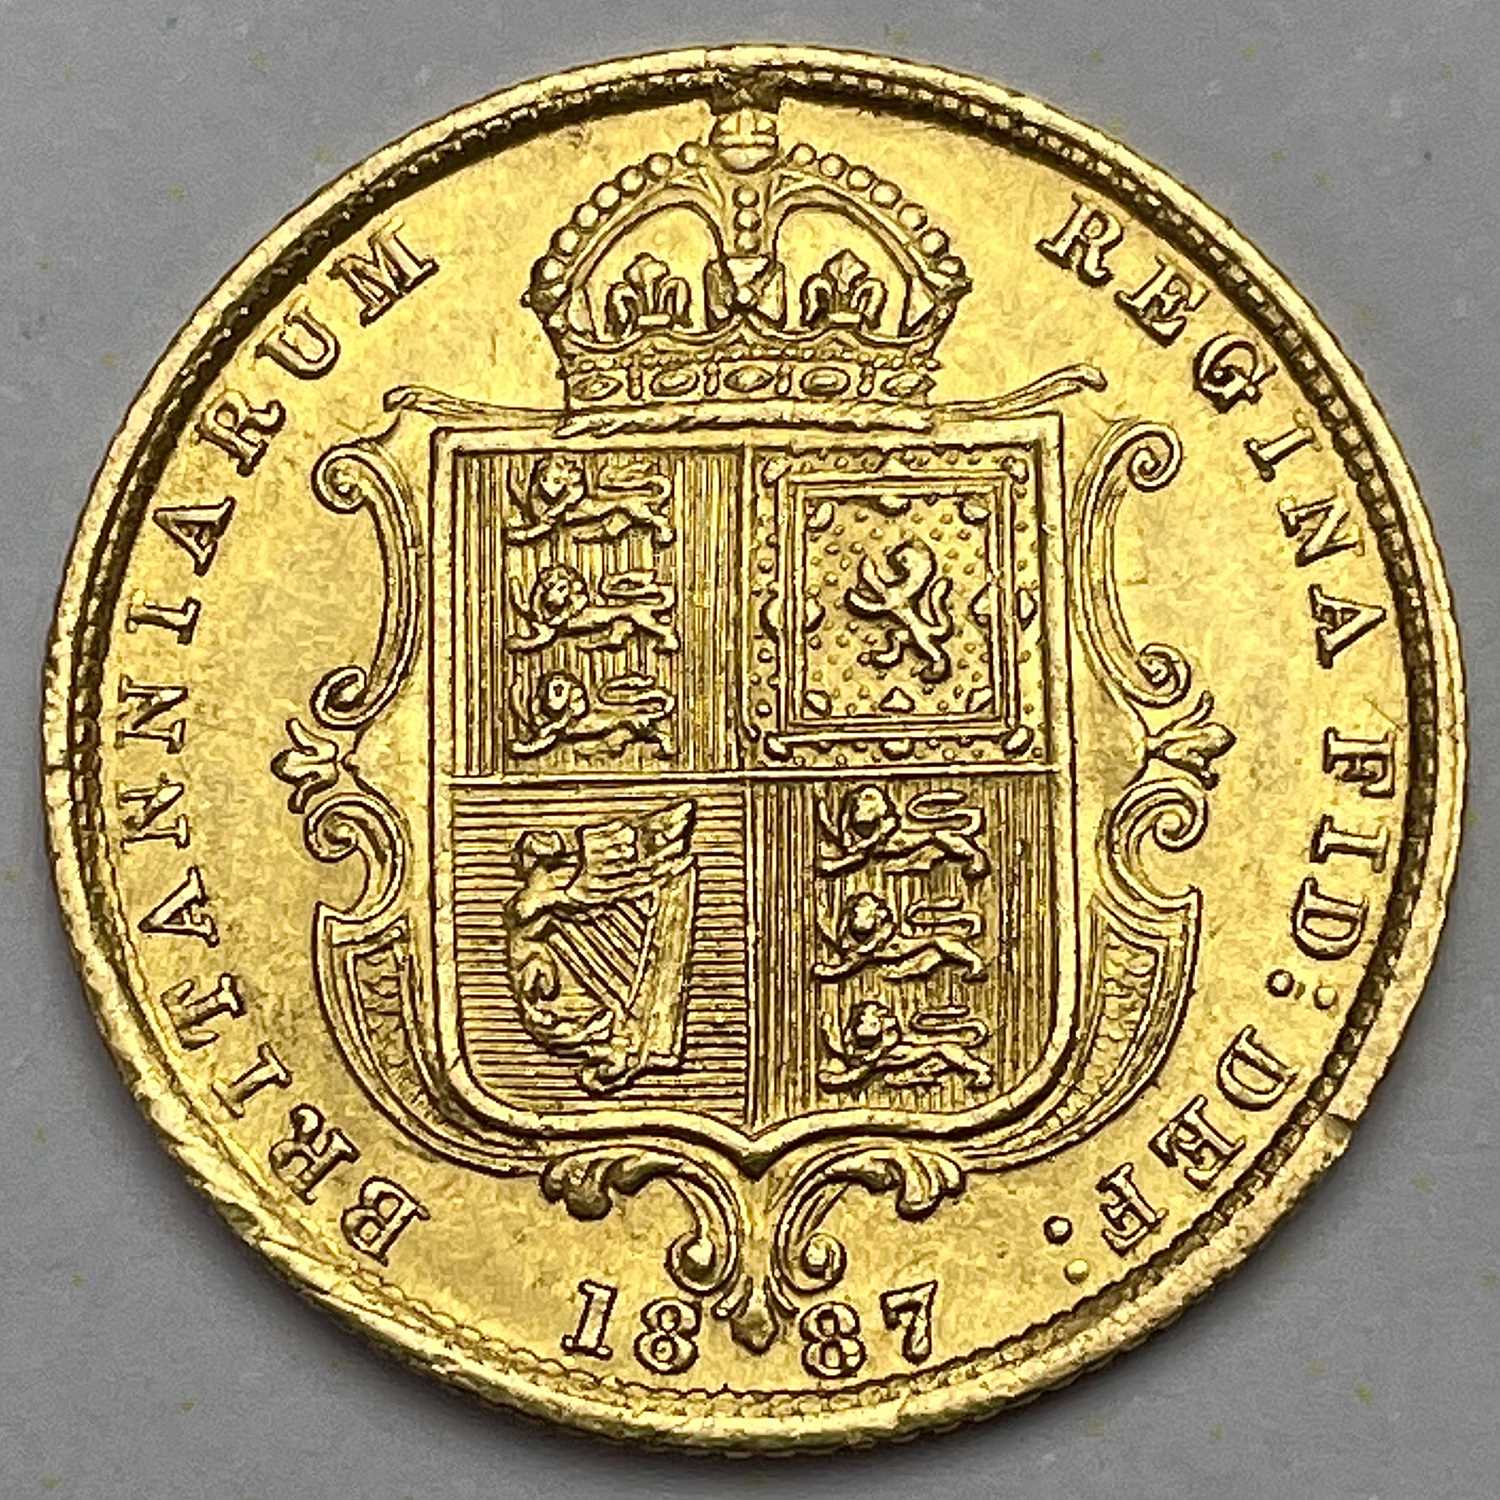 Lot 650 - Victoria 1887 jubilee bust half sovereign coin.